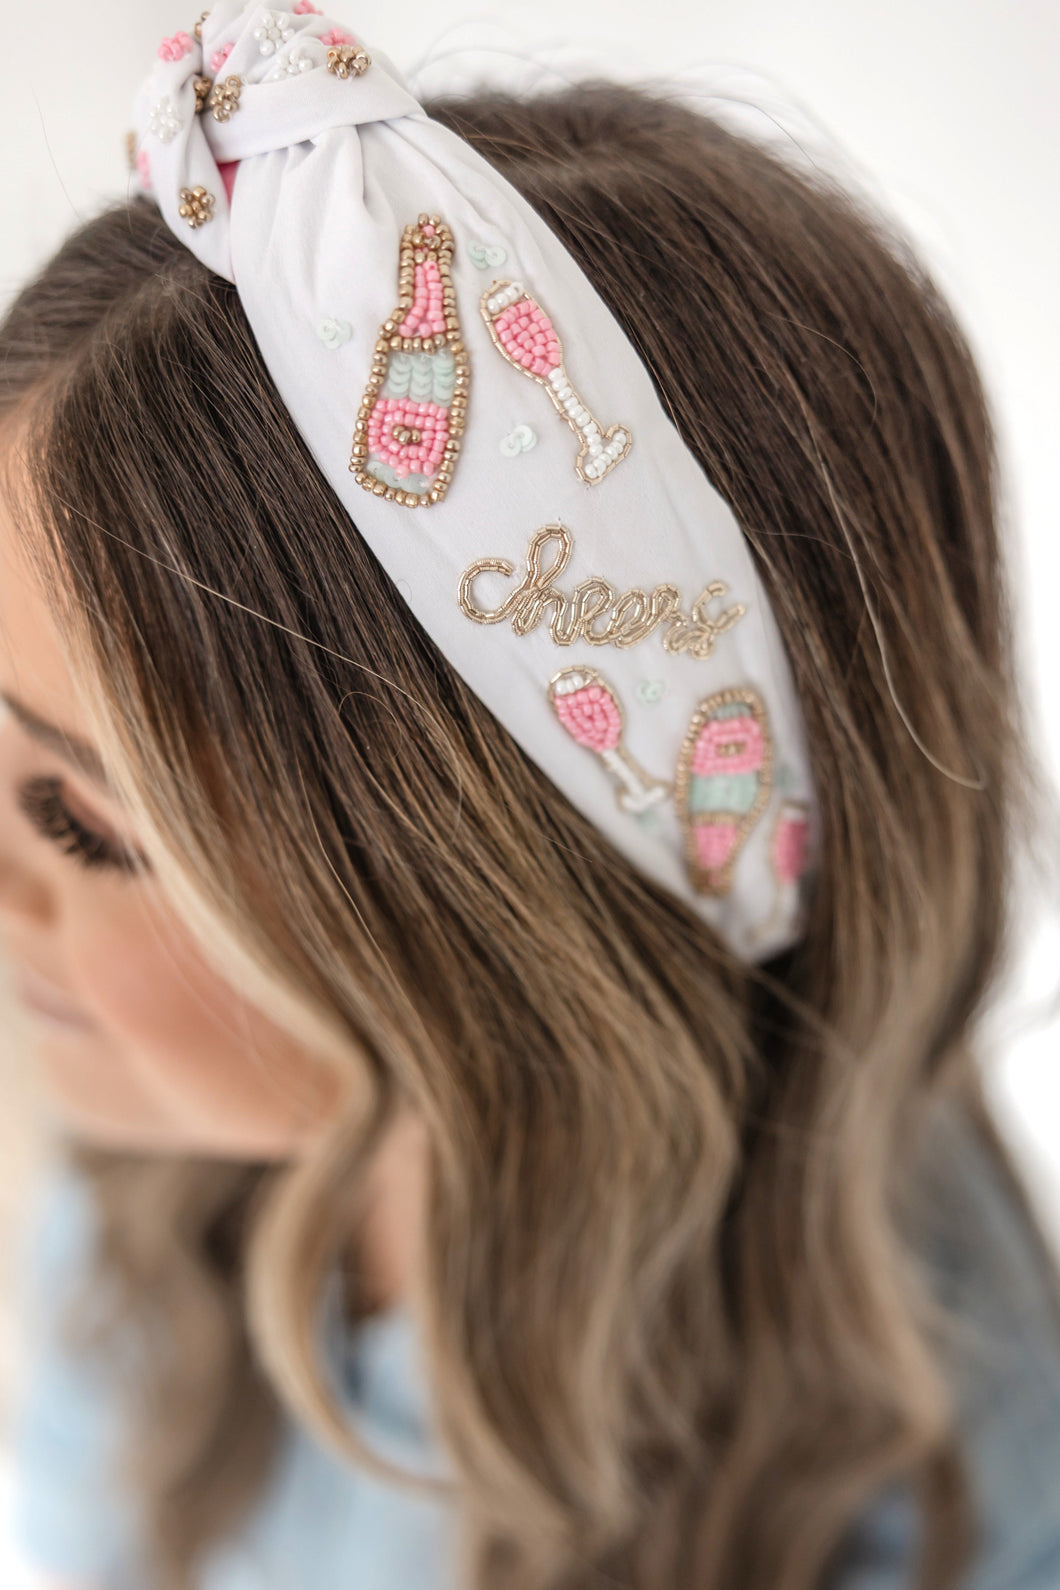 Champagne - Rose all Day Hand embellished Headband